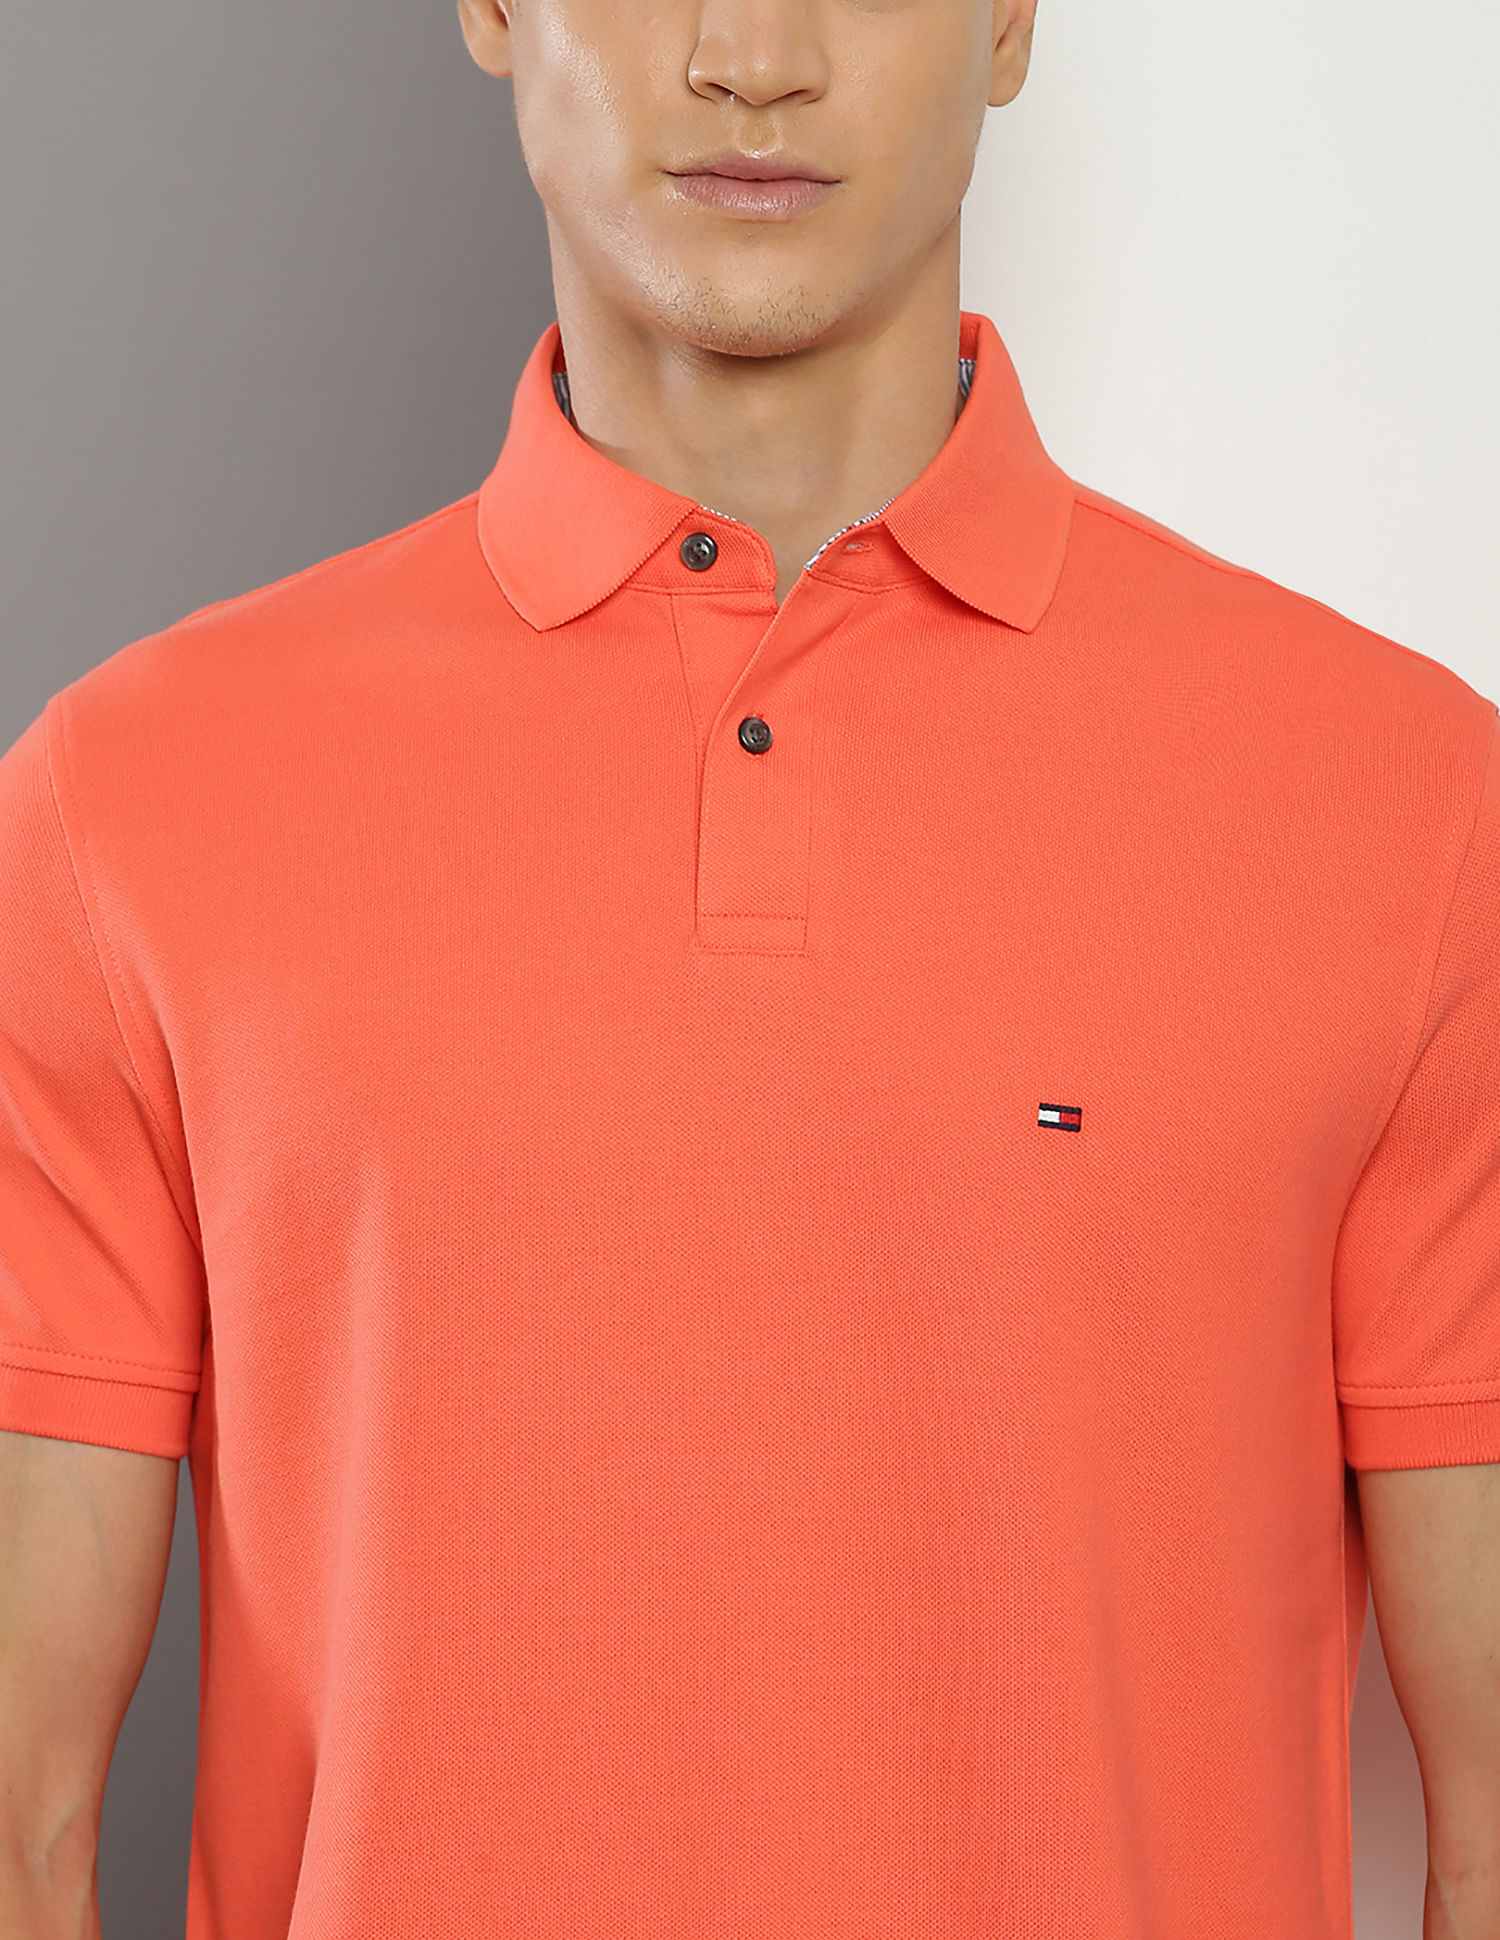 Polo Hilfiger Solid 1985 Buy Tommy Organic Shirt Cotton